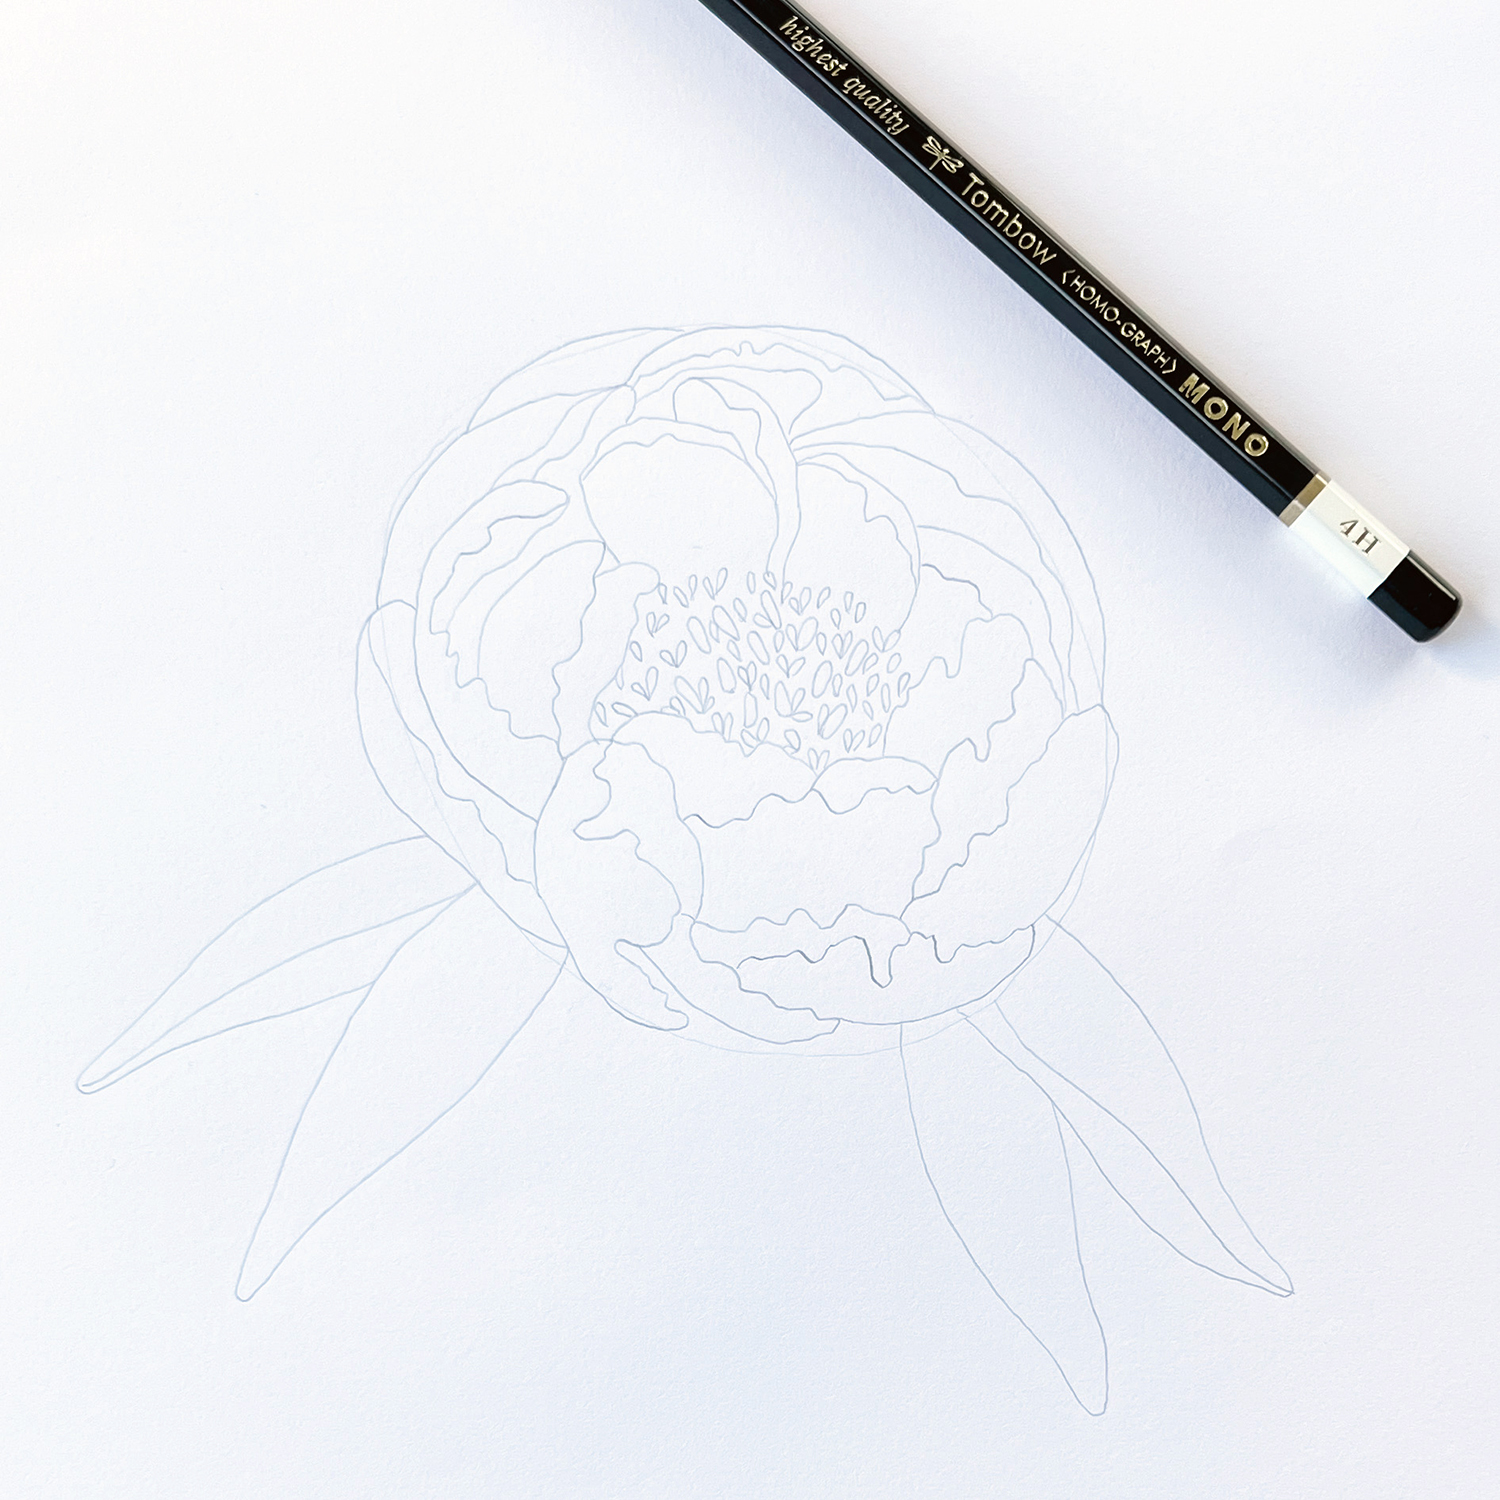 How to Draw a Peony by Jessica Mack on behalf of Tombow